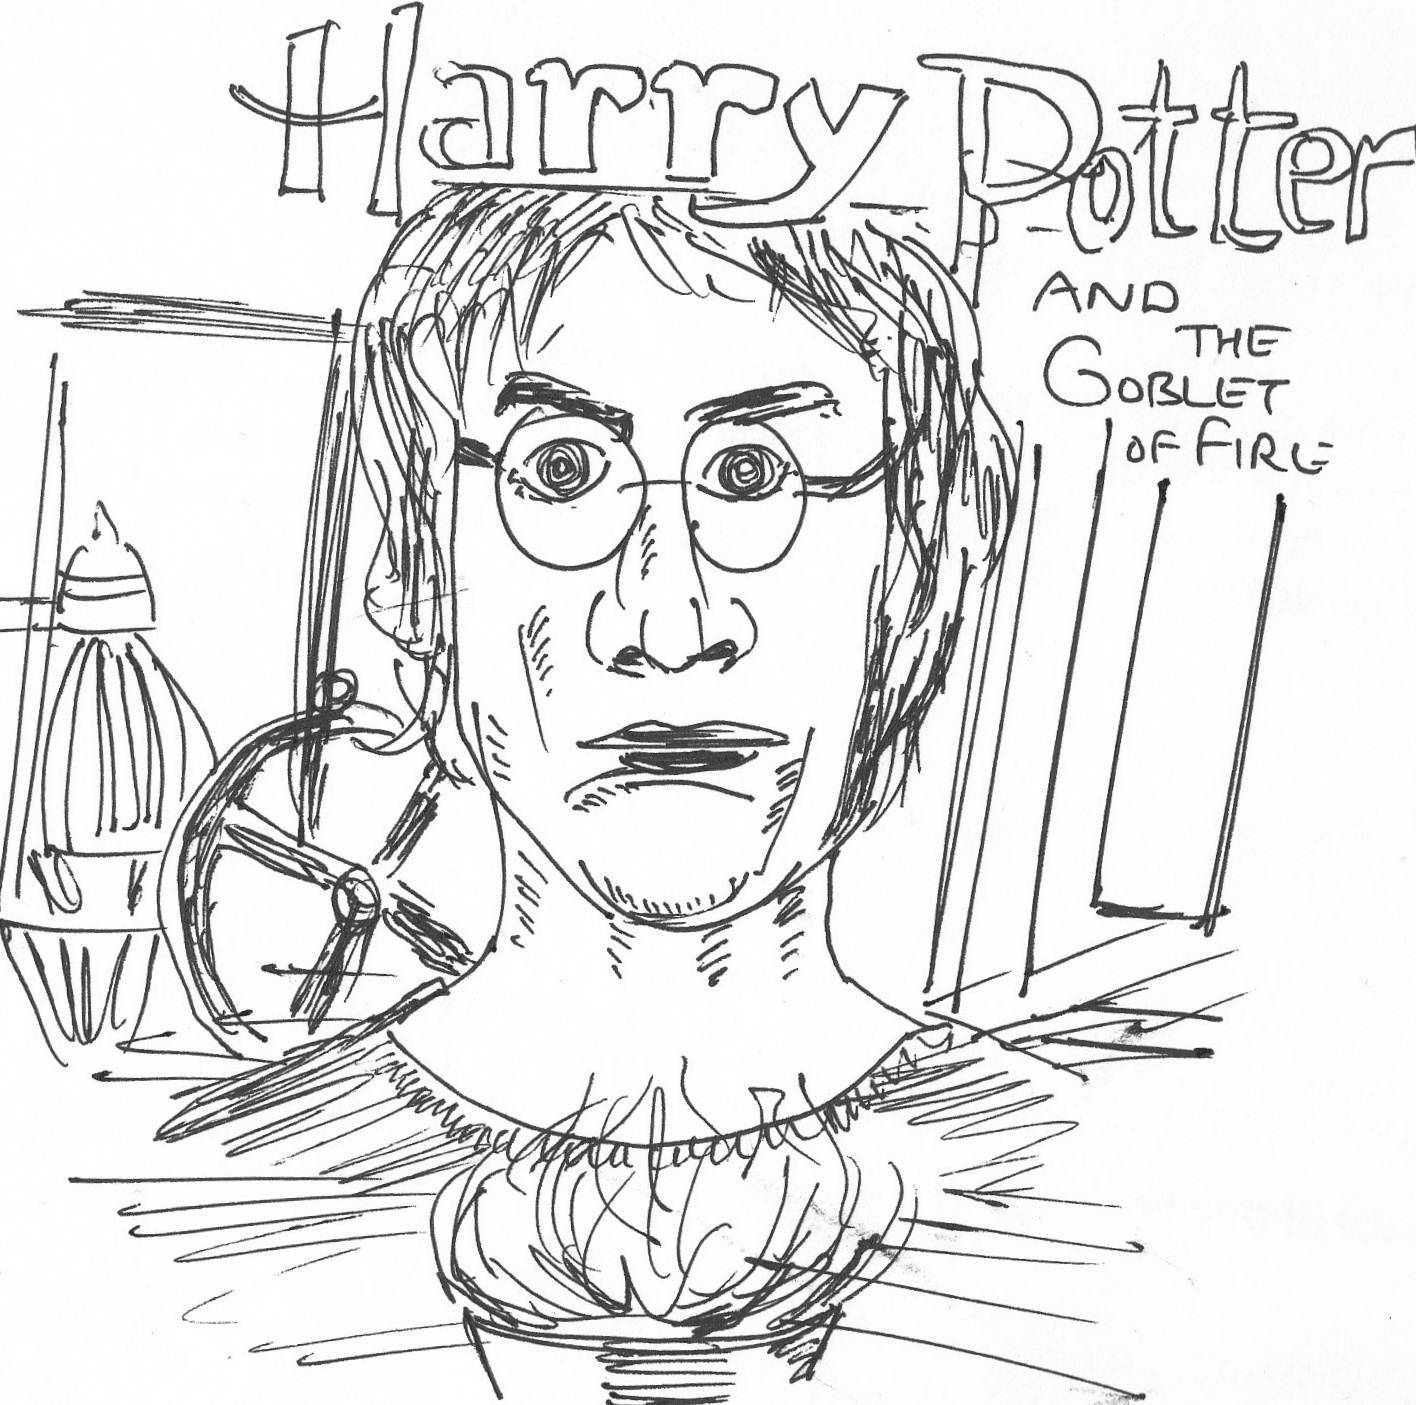 CHUMMADRAW: Harry Potter and the Goblet of Fire